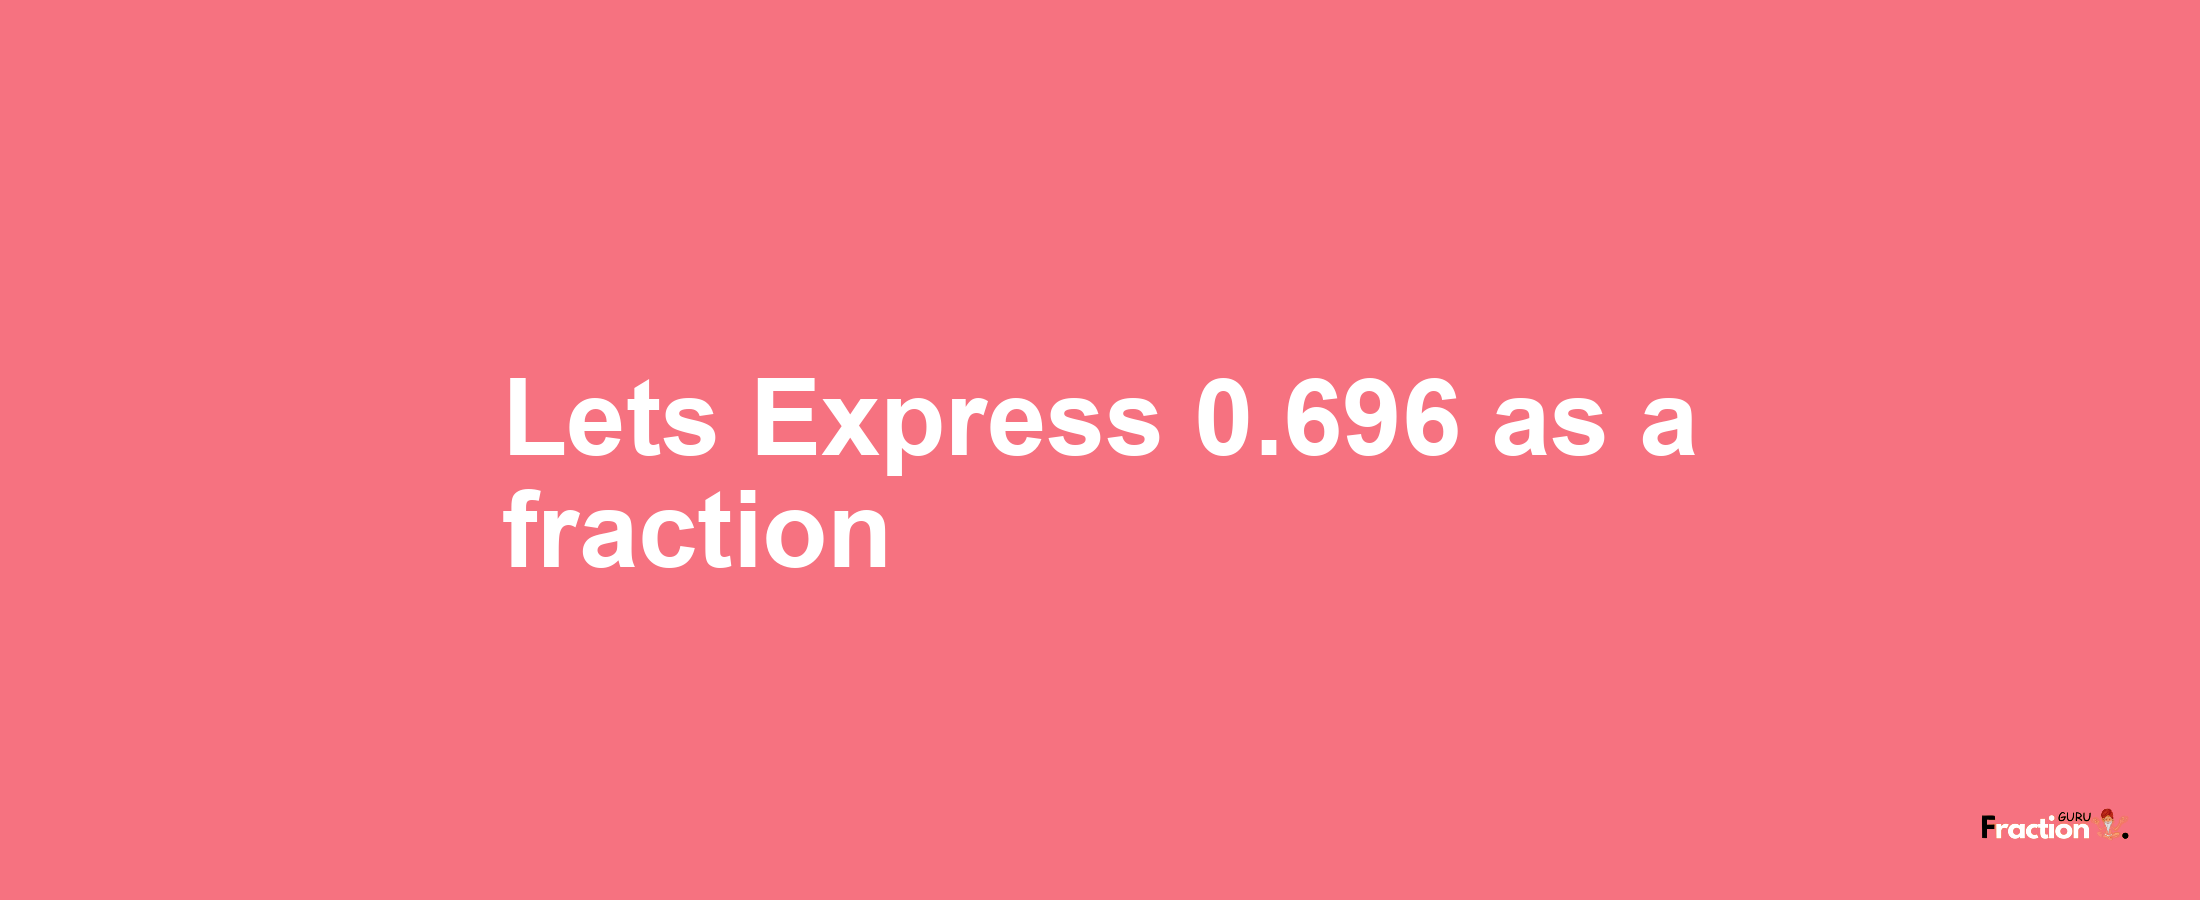 Lets Express 0.696 as afraction